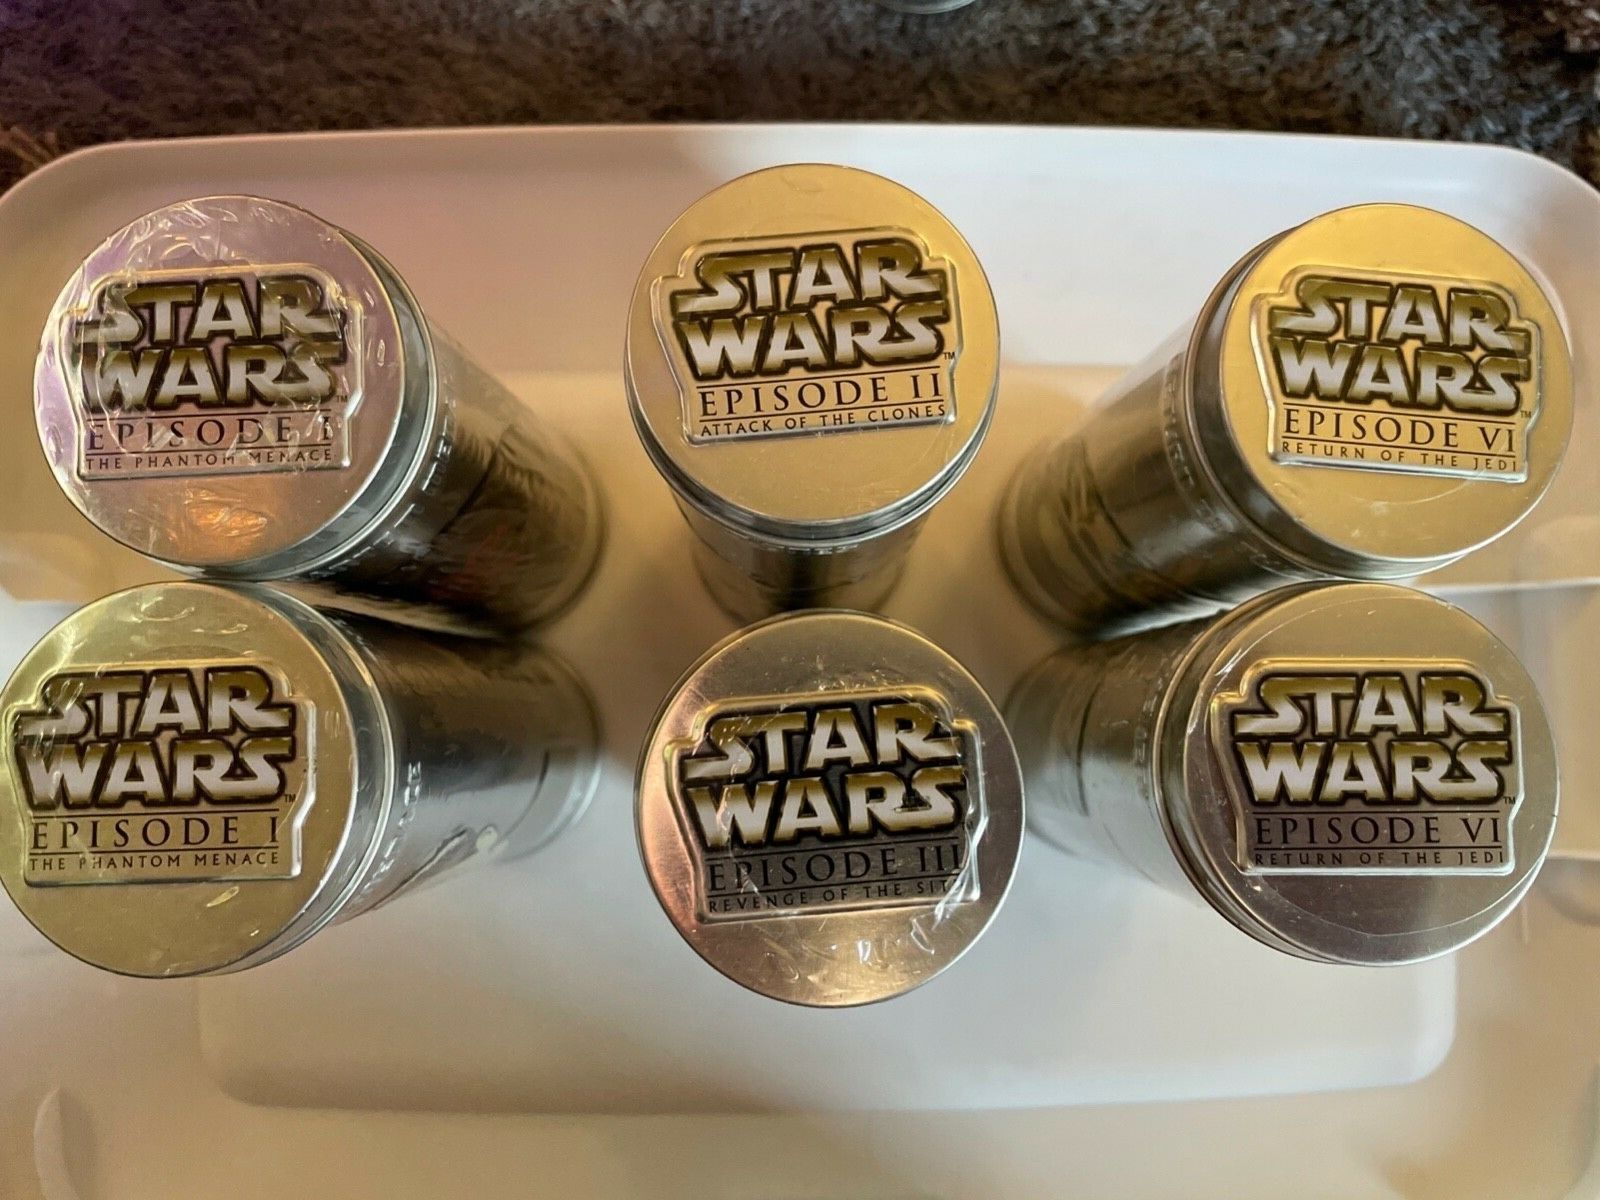 2005 Burger King Star Wars Watches in Tin Cans - Lot of 11 ( ALL Sealed)